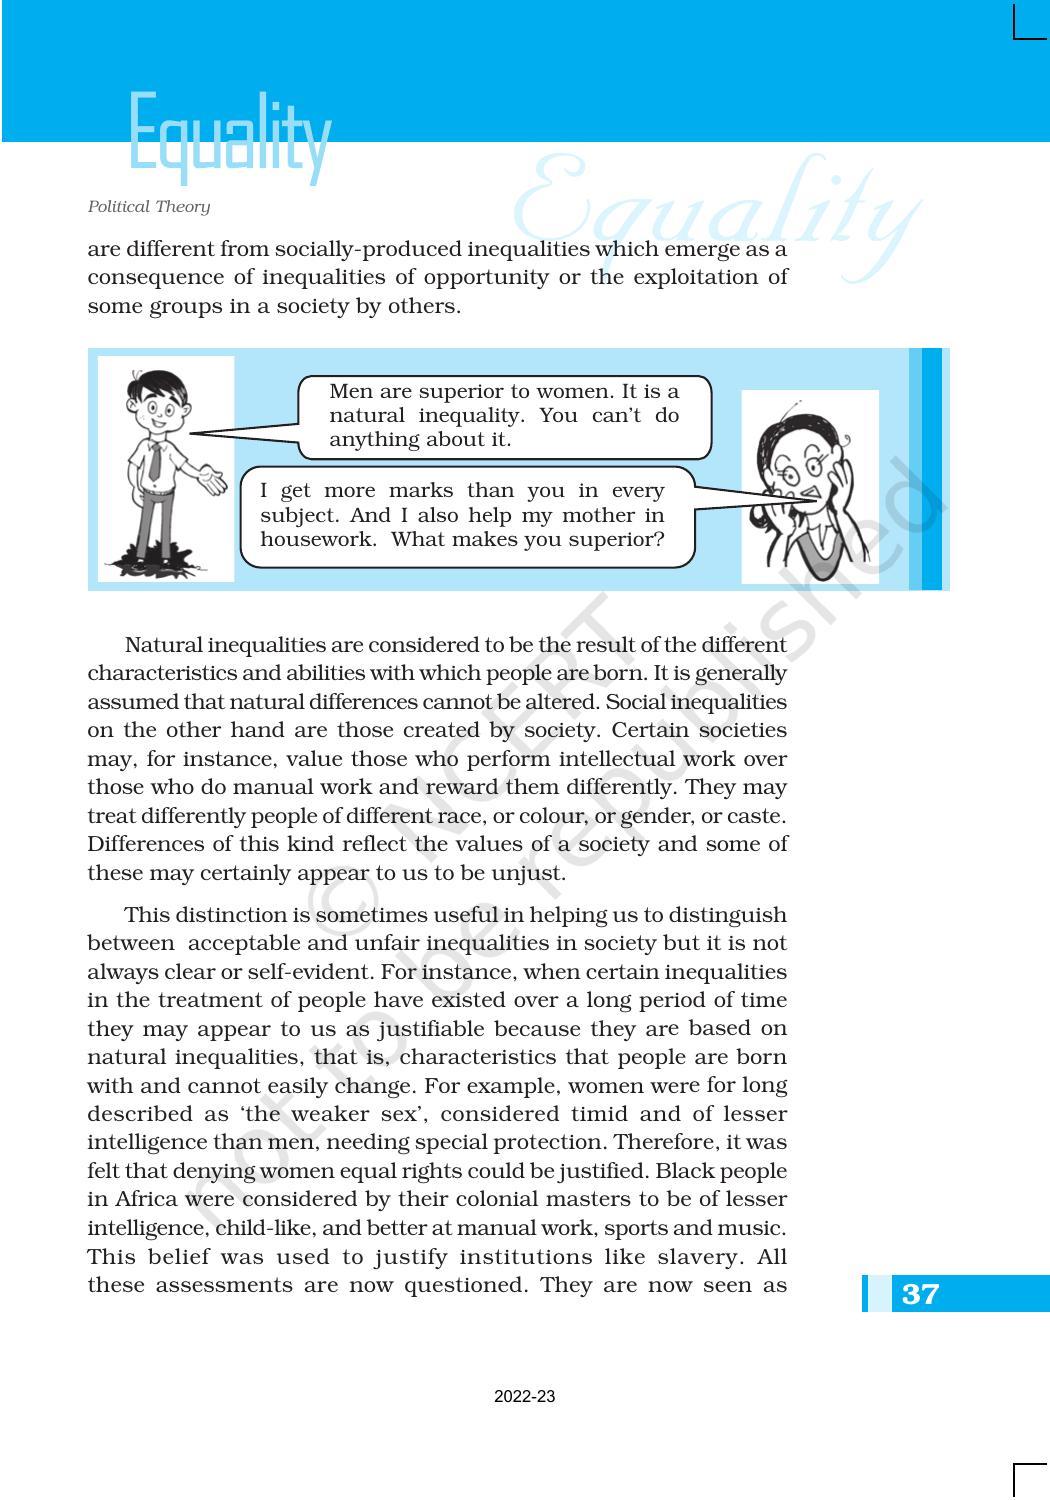 NCERT Book for Class 11 Political Science (Political Theory) Chapter 3 Equality - Page 7